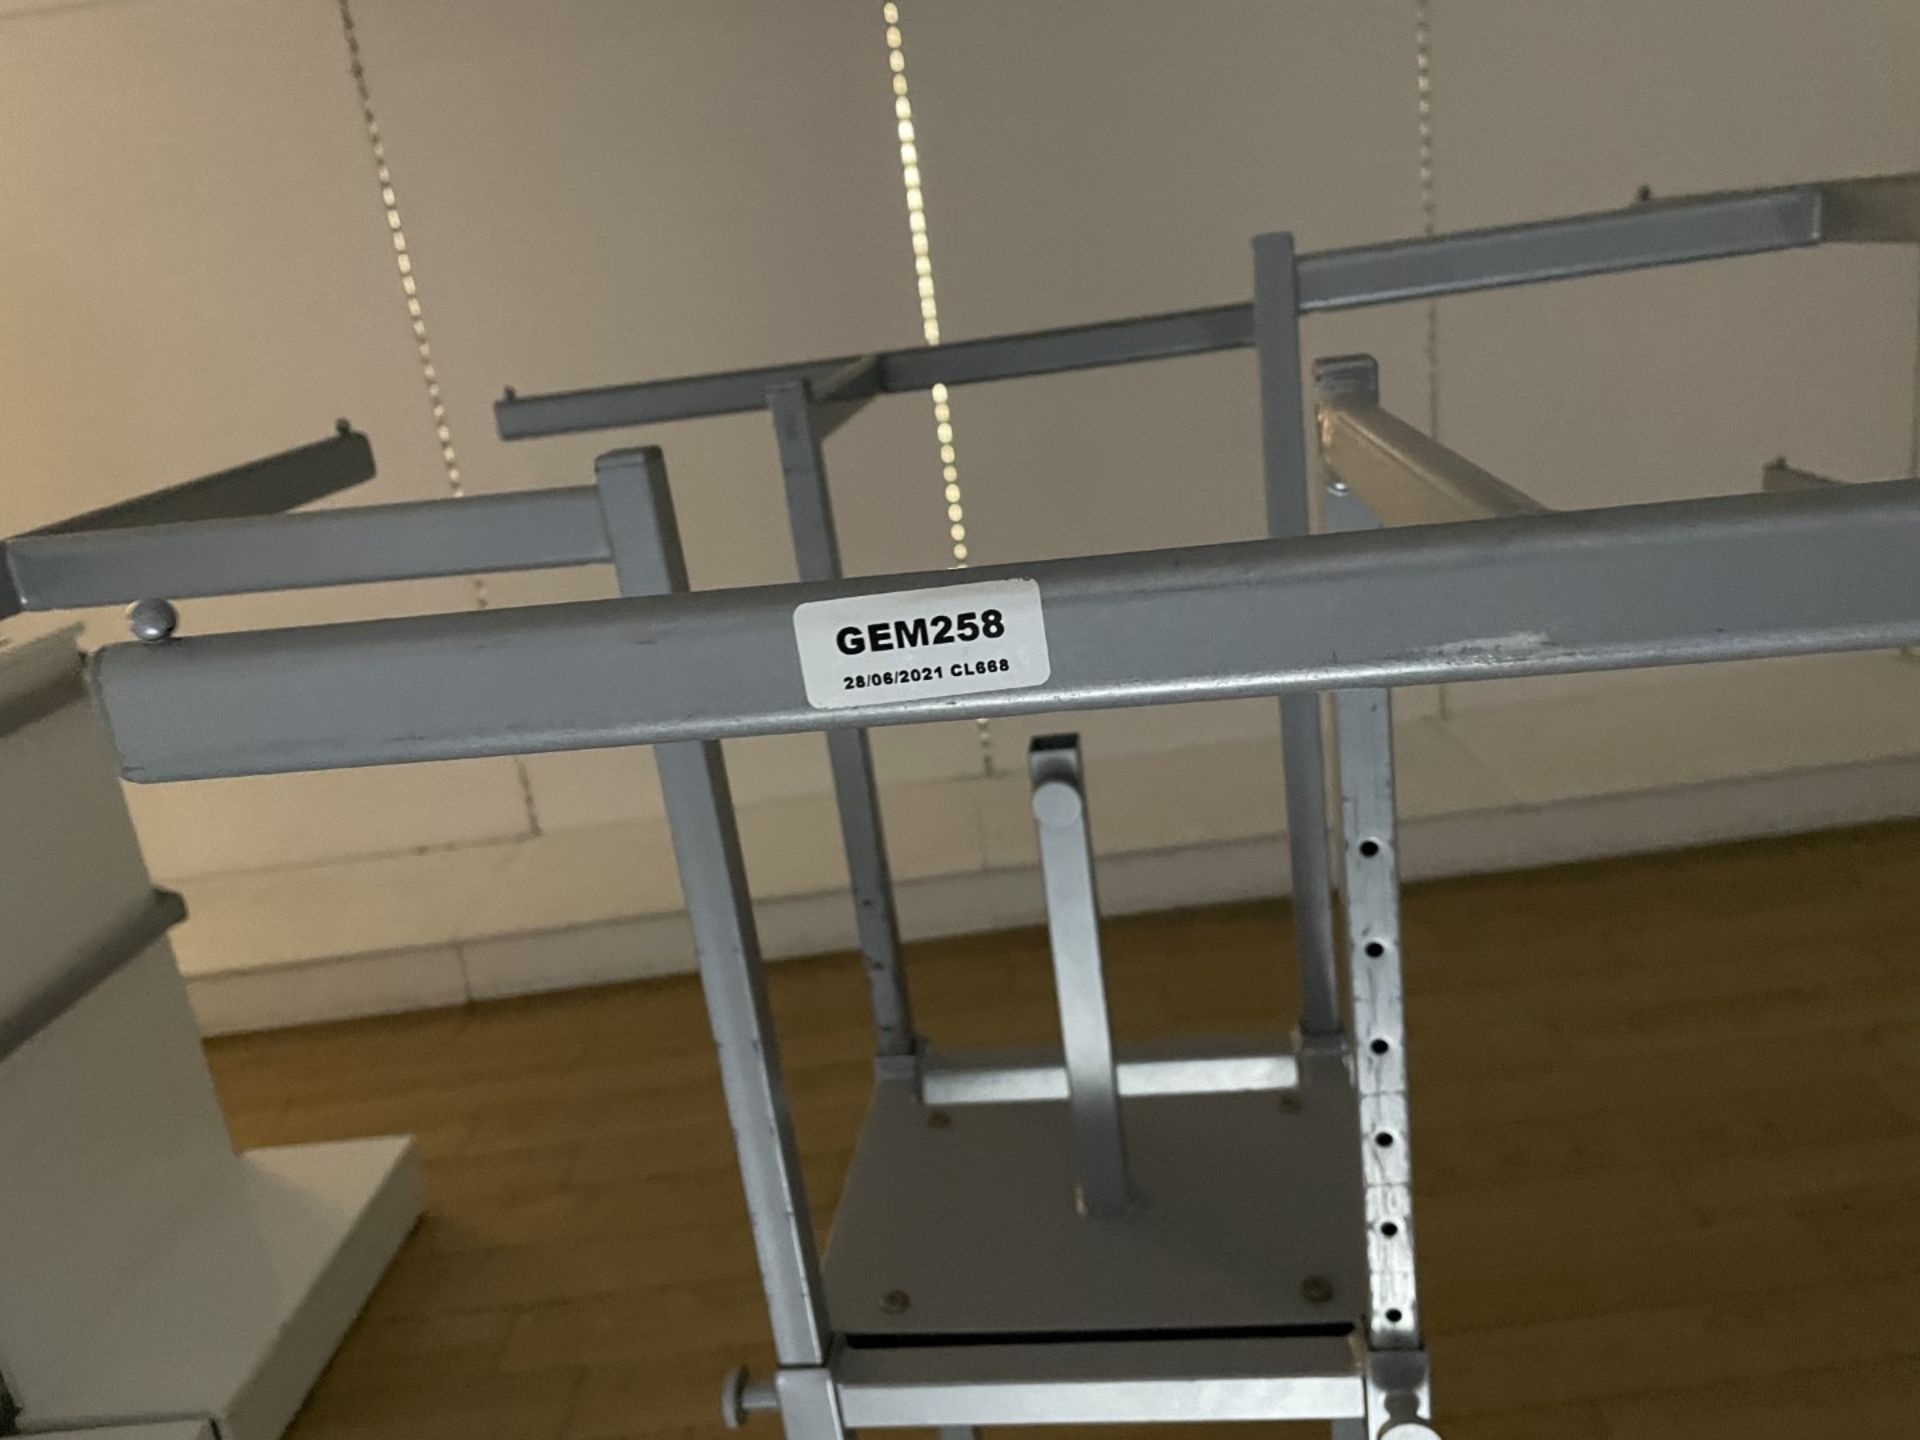 9 x Retail Display Clothes Rails Stands With Four Stepped Arm Rails - CL670 - Ref: GEM258 - - Image 5 of 7